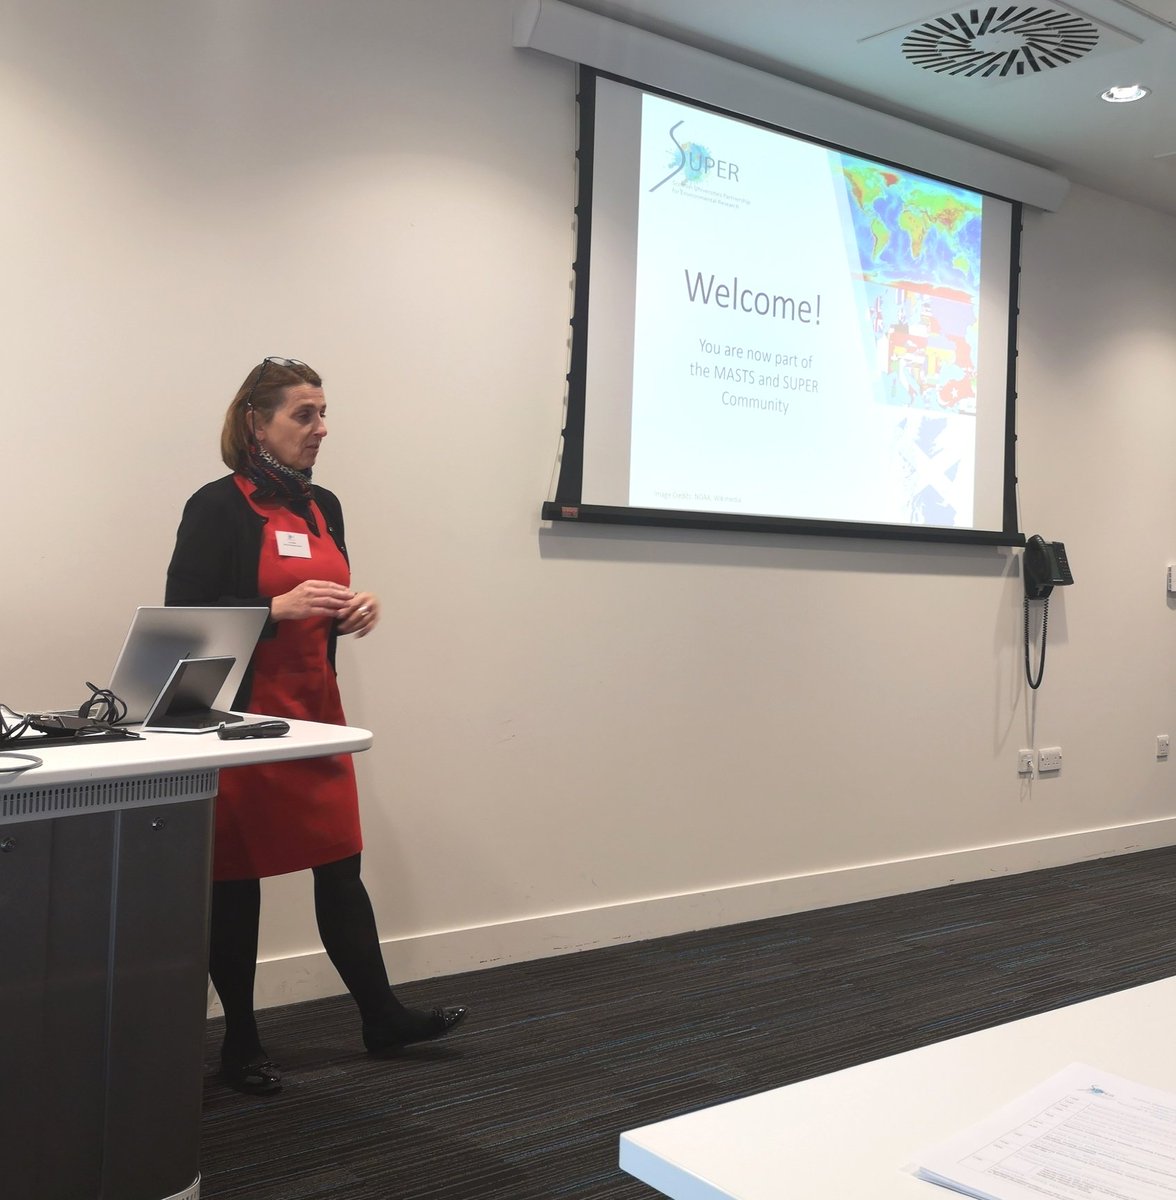 Listening to the Dean of the Graduate School, Dr Lois Calder, talk about the PhD journey to our new @SUPERDTP1 students at our induction event #MASTSASM19 #SUPERDTP #phdlife